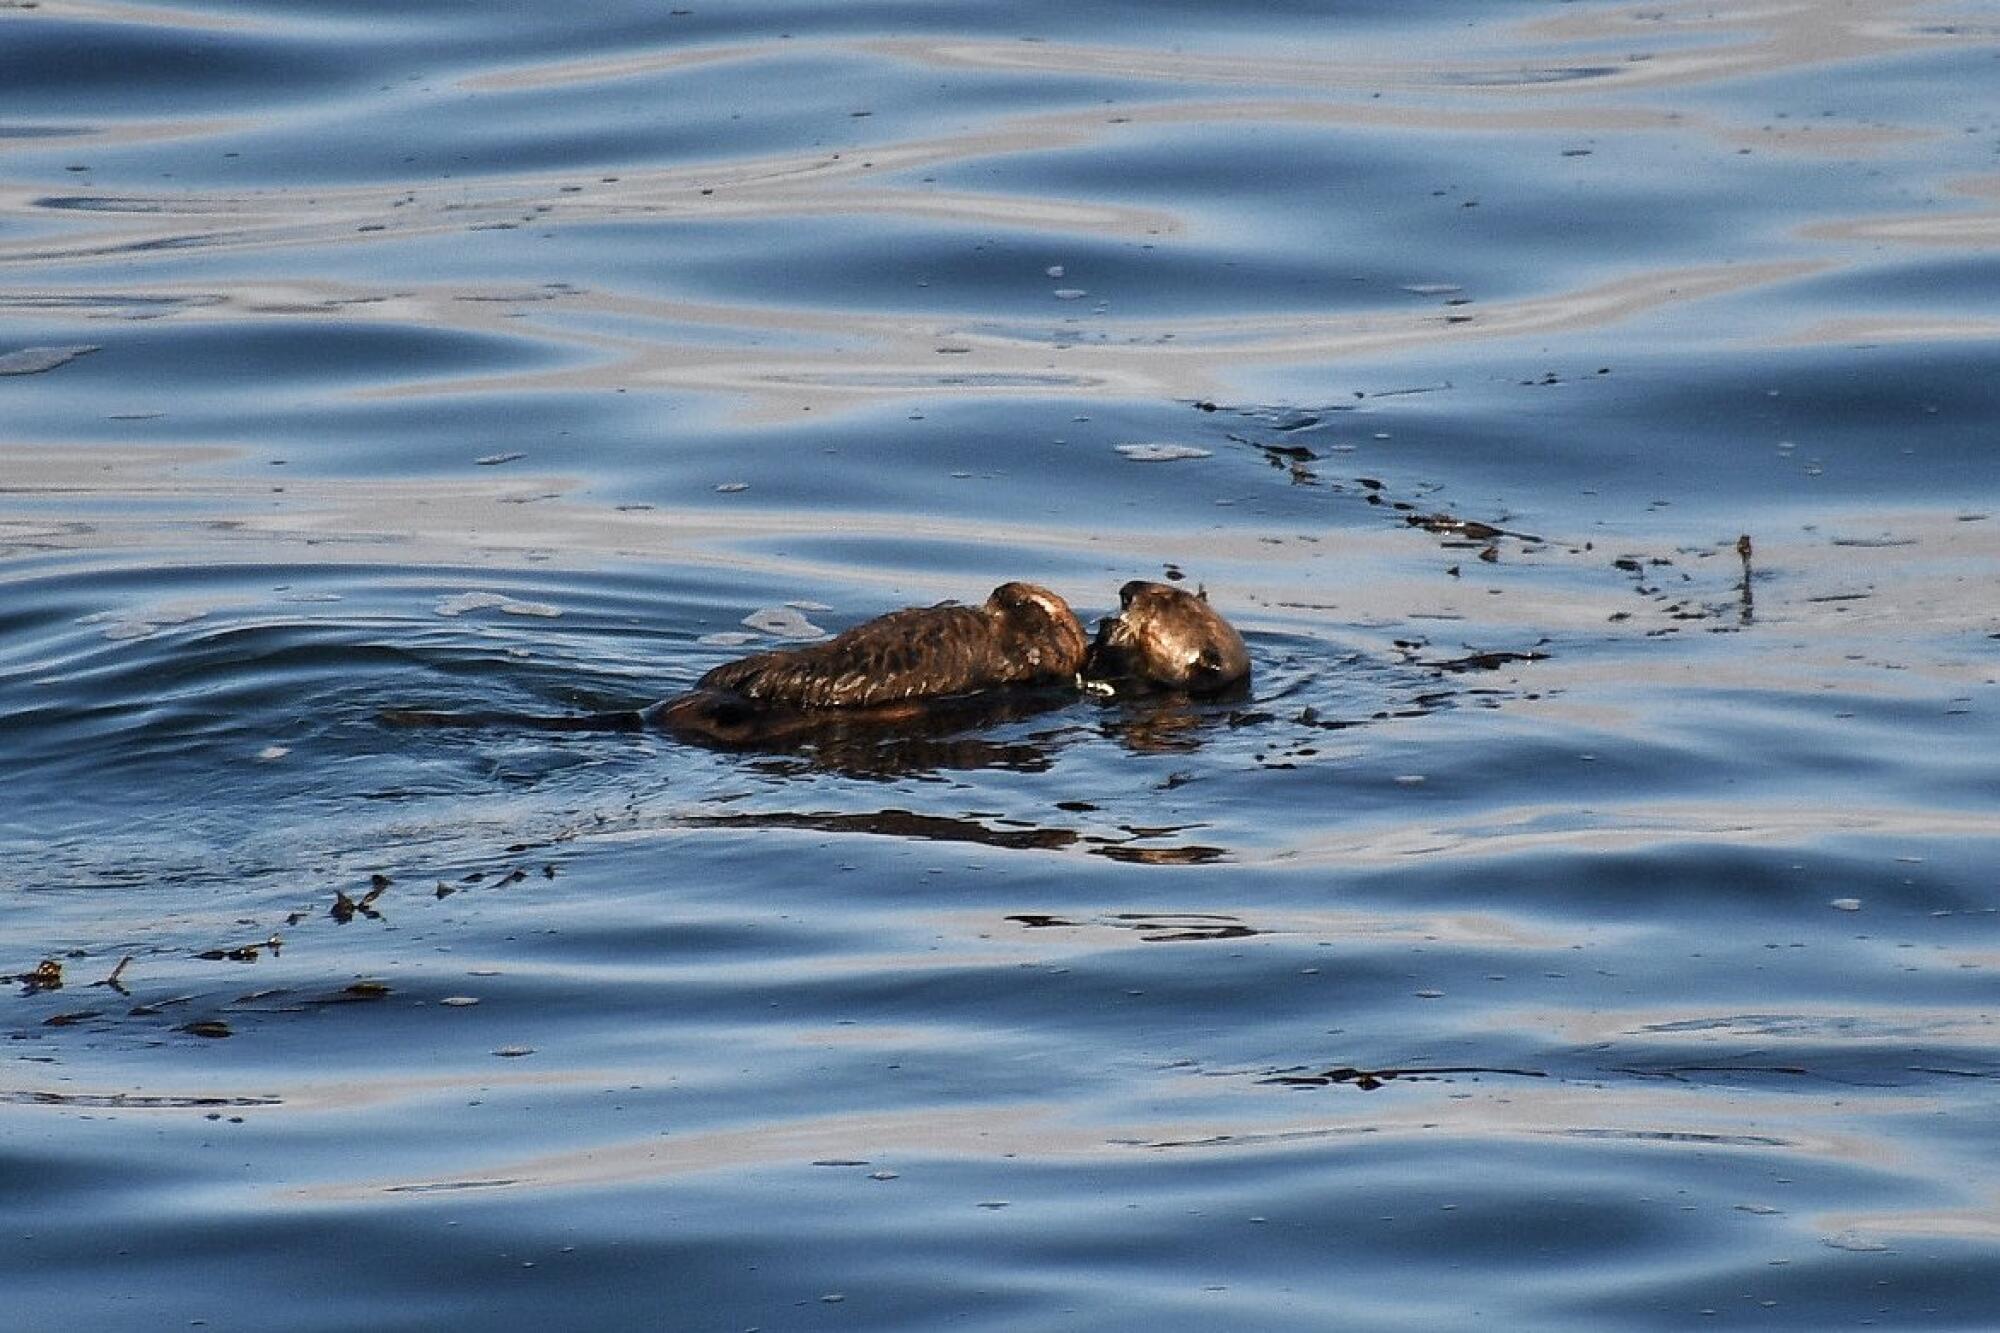 Sea otter 841with her pup.